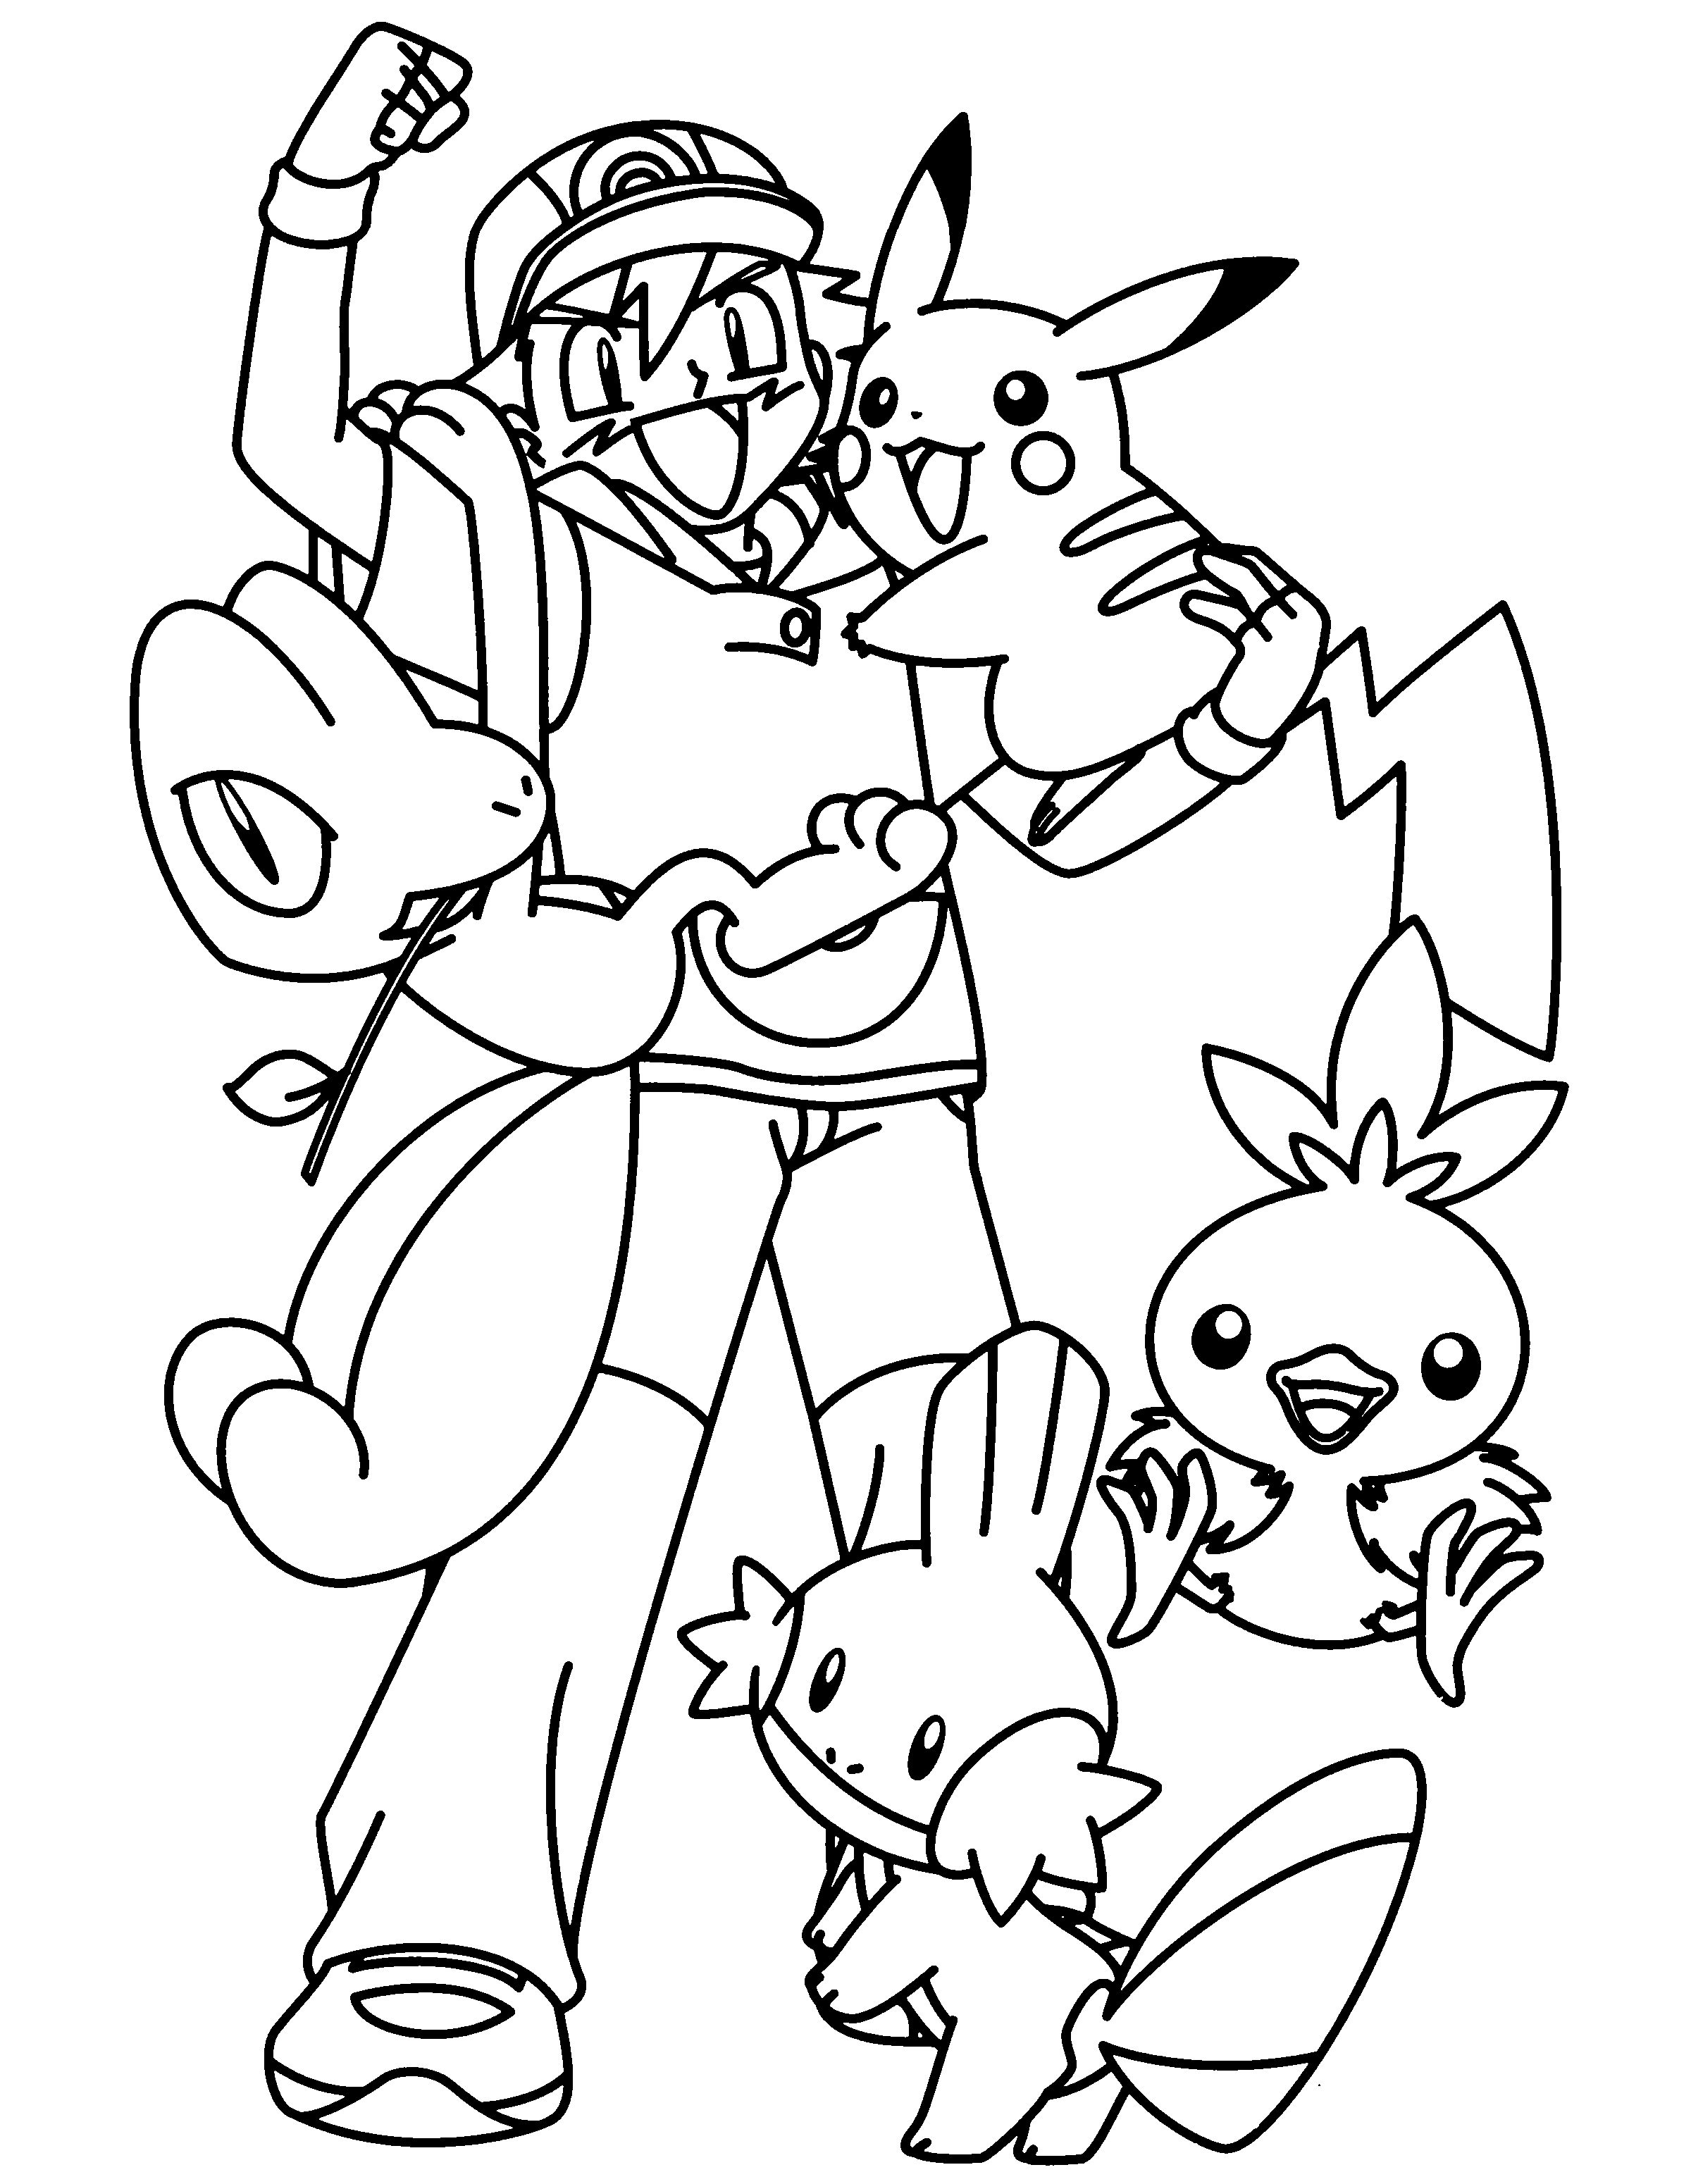 free-printable-pokemon-coloring-pages-37-pics-how-to-draw-in-1-minute